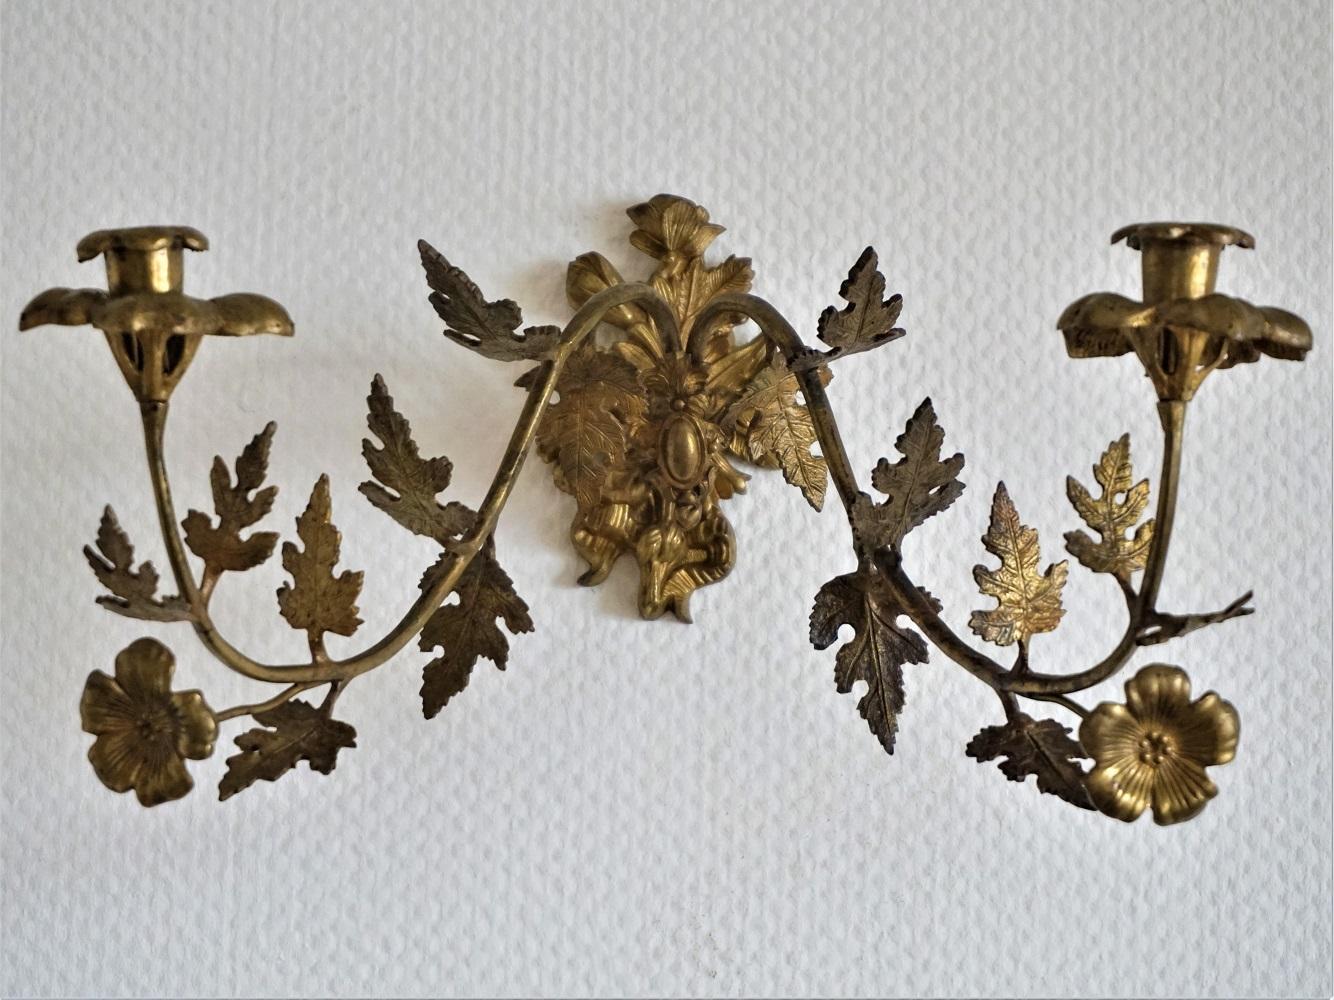 A pair of french two-arm wall candle sconces, gilt bronze and brass decorated with leaf and floral motifs, beautiful aged patina.